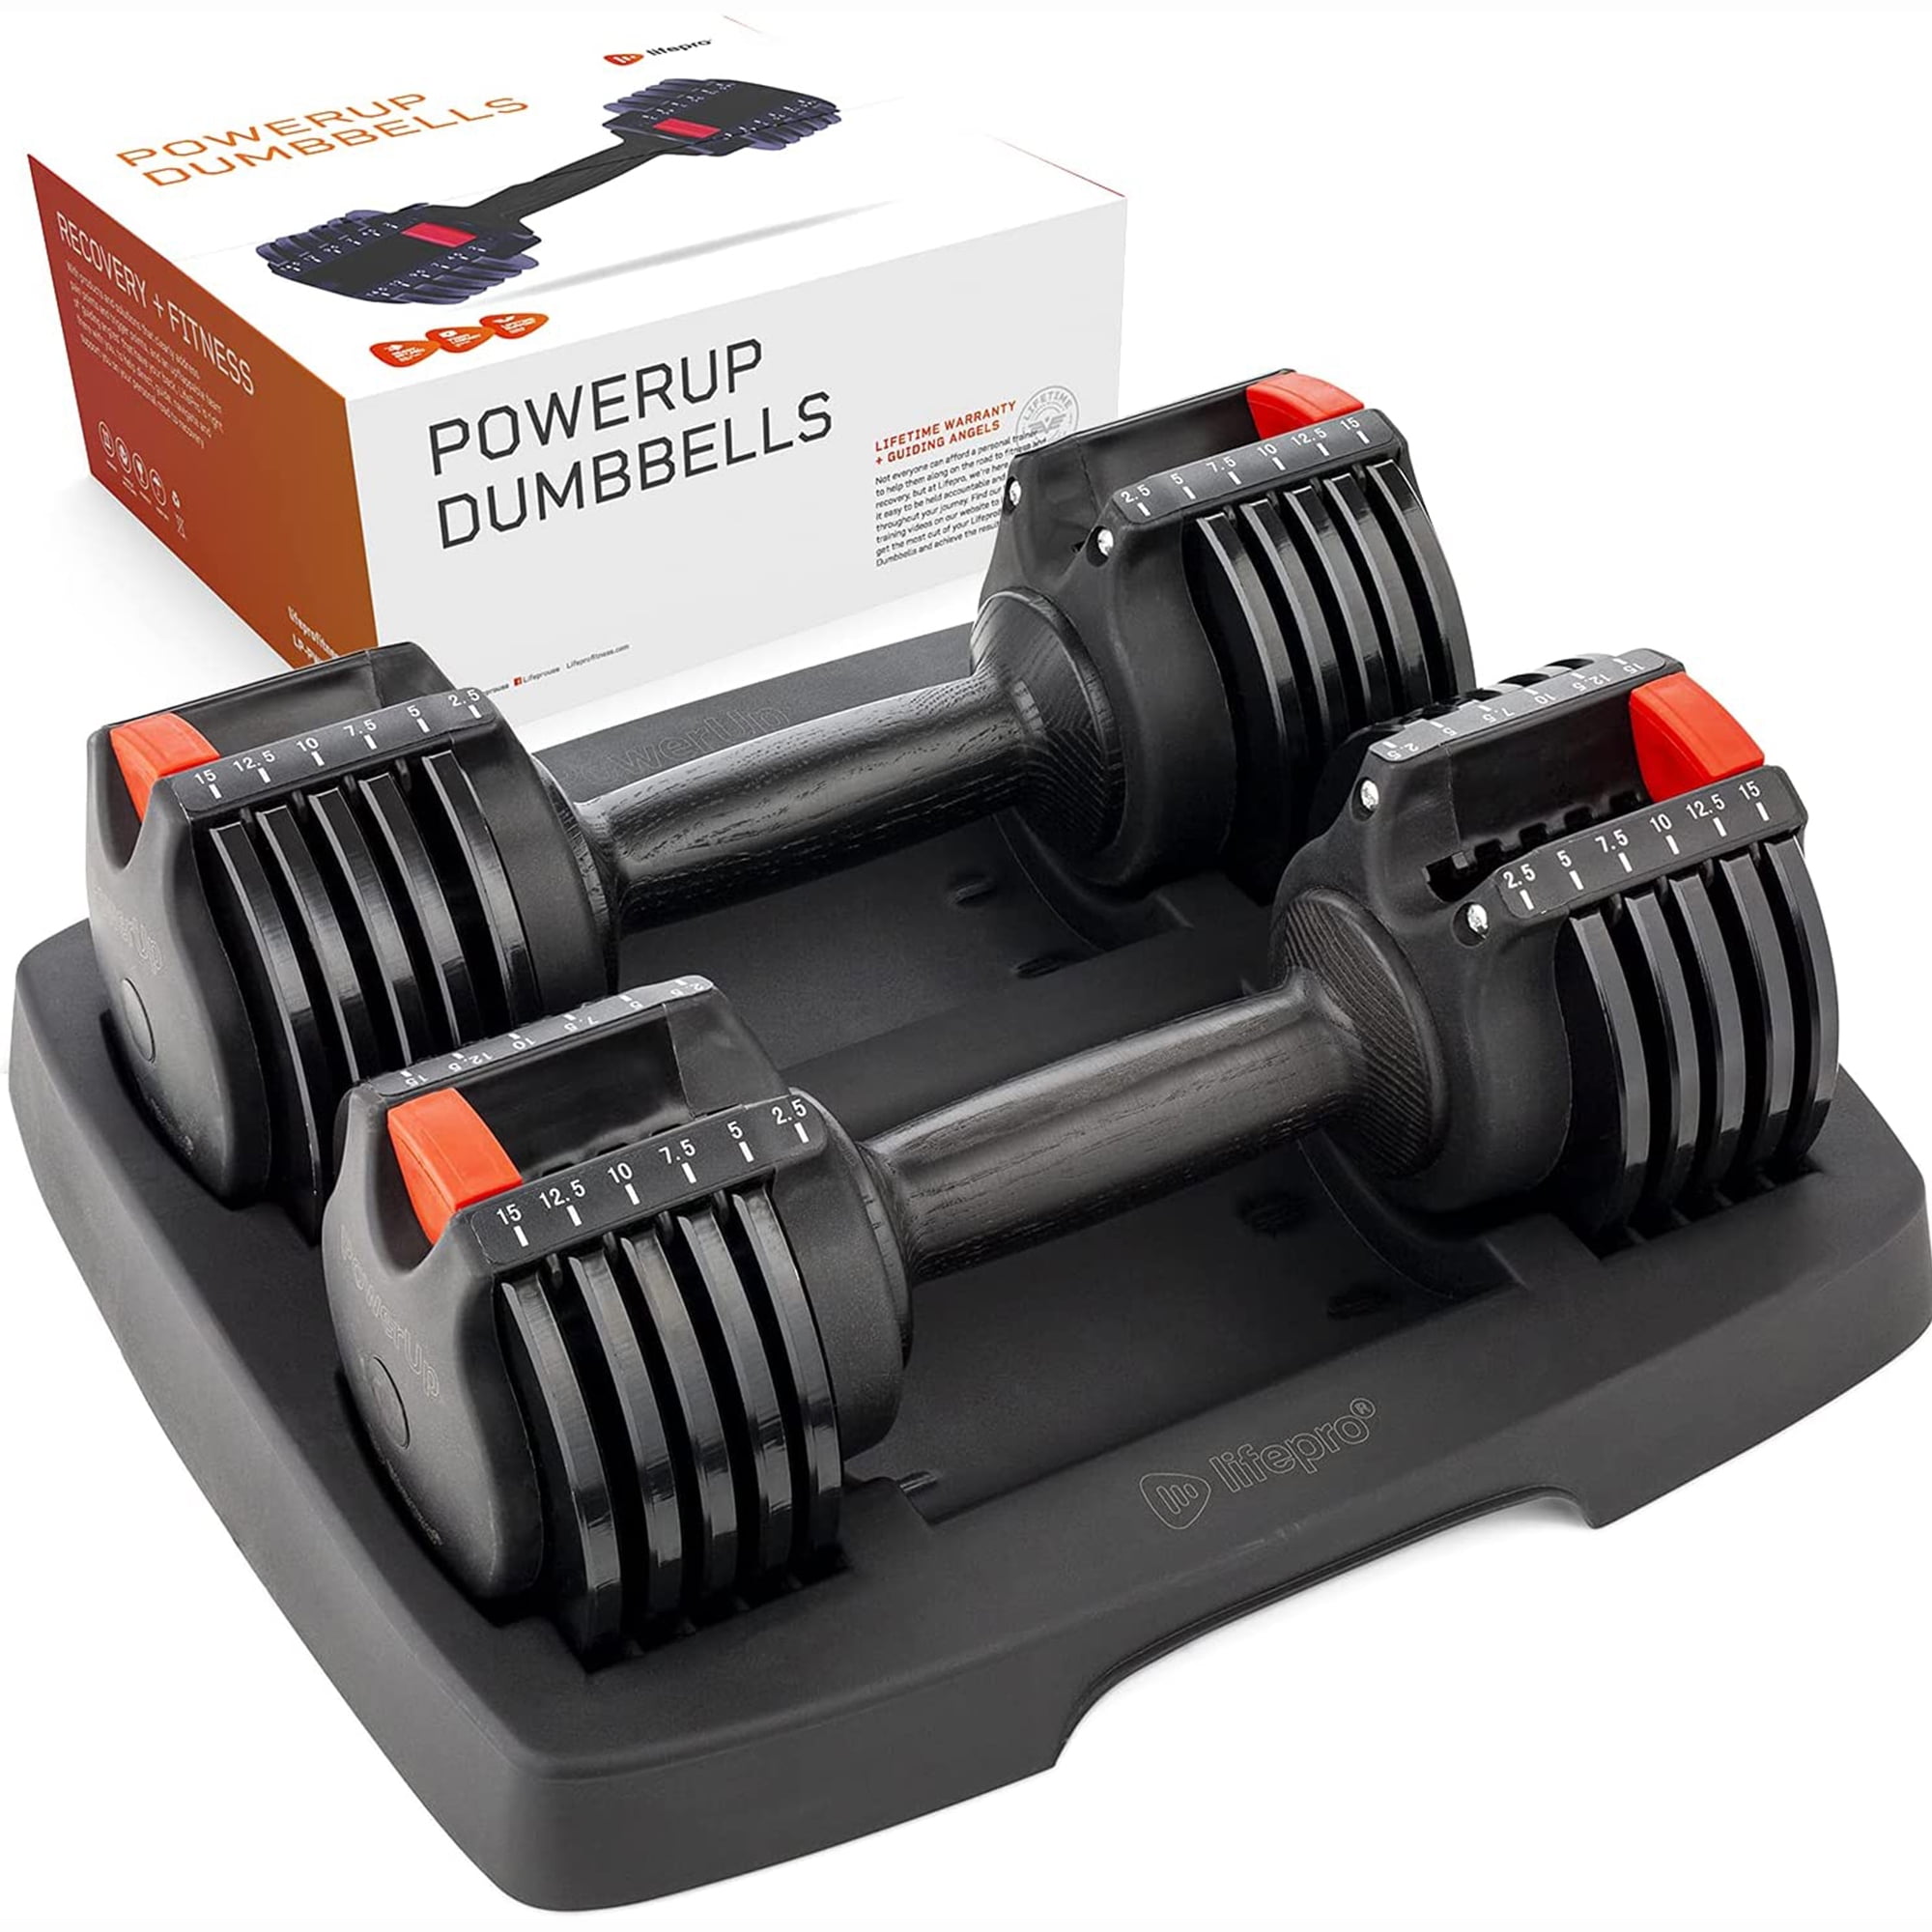 Lifepro PowerUp 15 Pound Dumbbells Adjustable Weights Set for Home Gym, 2 Pcs